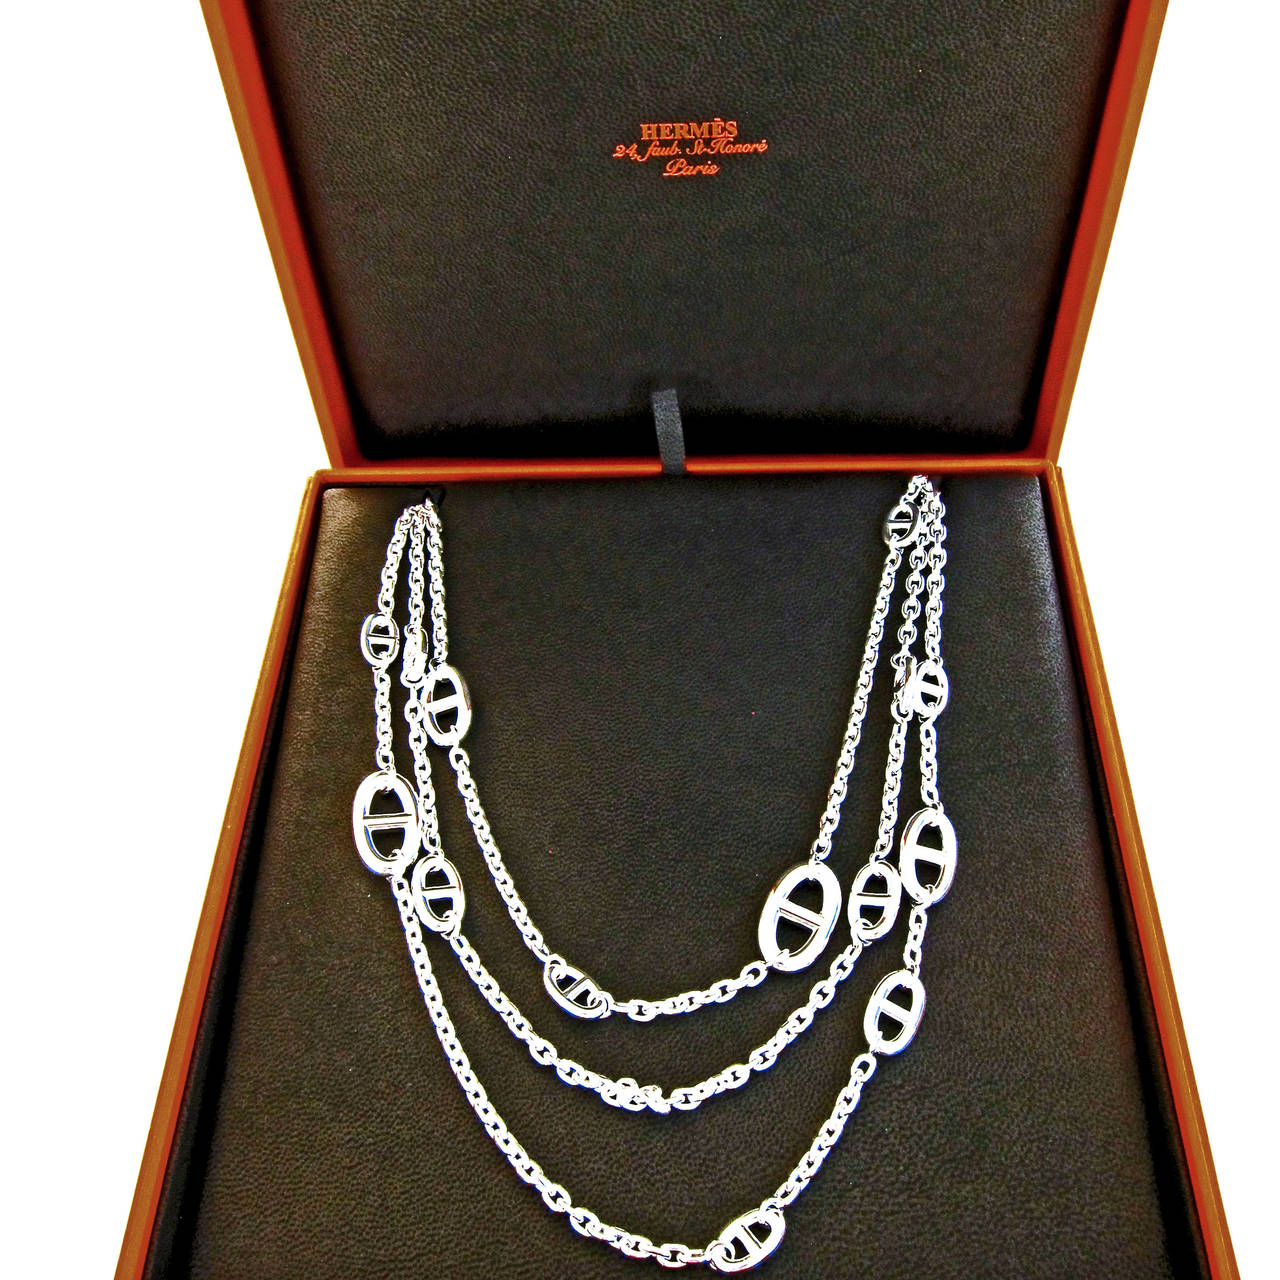 Hermes Farandole Solid Silver Long Necklace 160cm Single Double Triple Strand

Perfect gift! Brand New in Box, never worn
Below retail plus tax of $1986 where we are
Comes store fresh with Hermes jewelry gift box and ribbon
Iconic and coveted